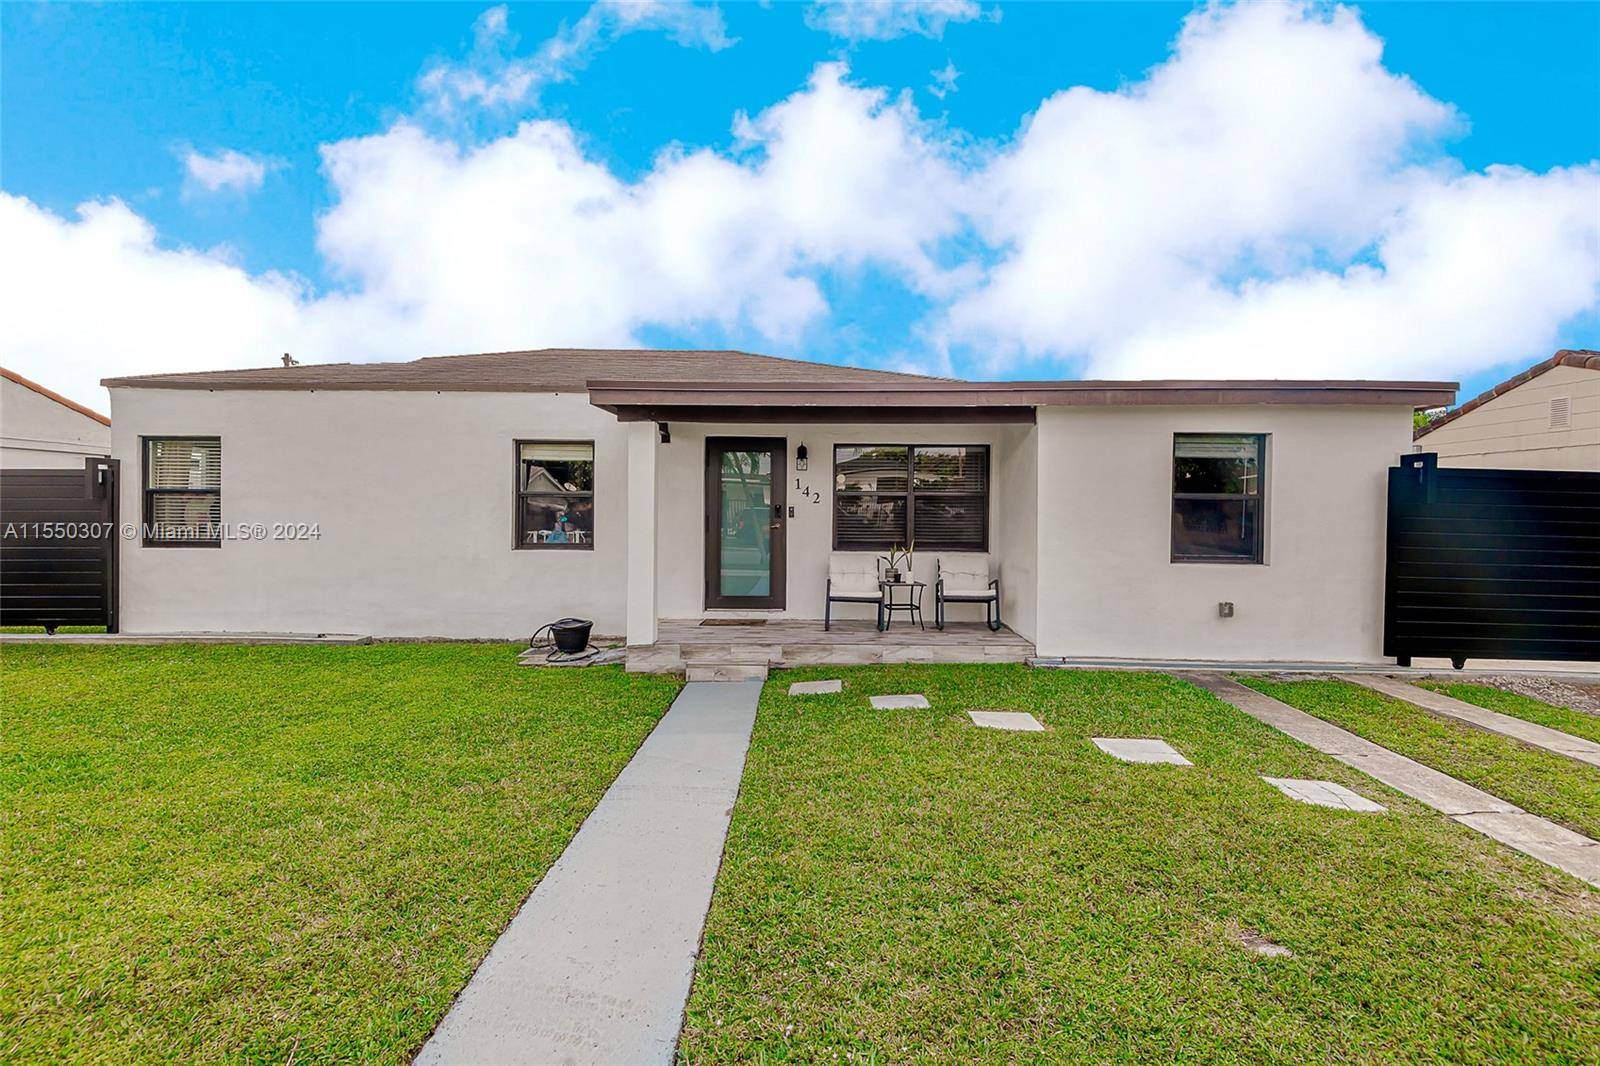 Presenting a fully remodeled home, featuring 3 beds, 2 baths In a very desirable neighborhood in Hialeah.